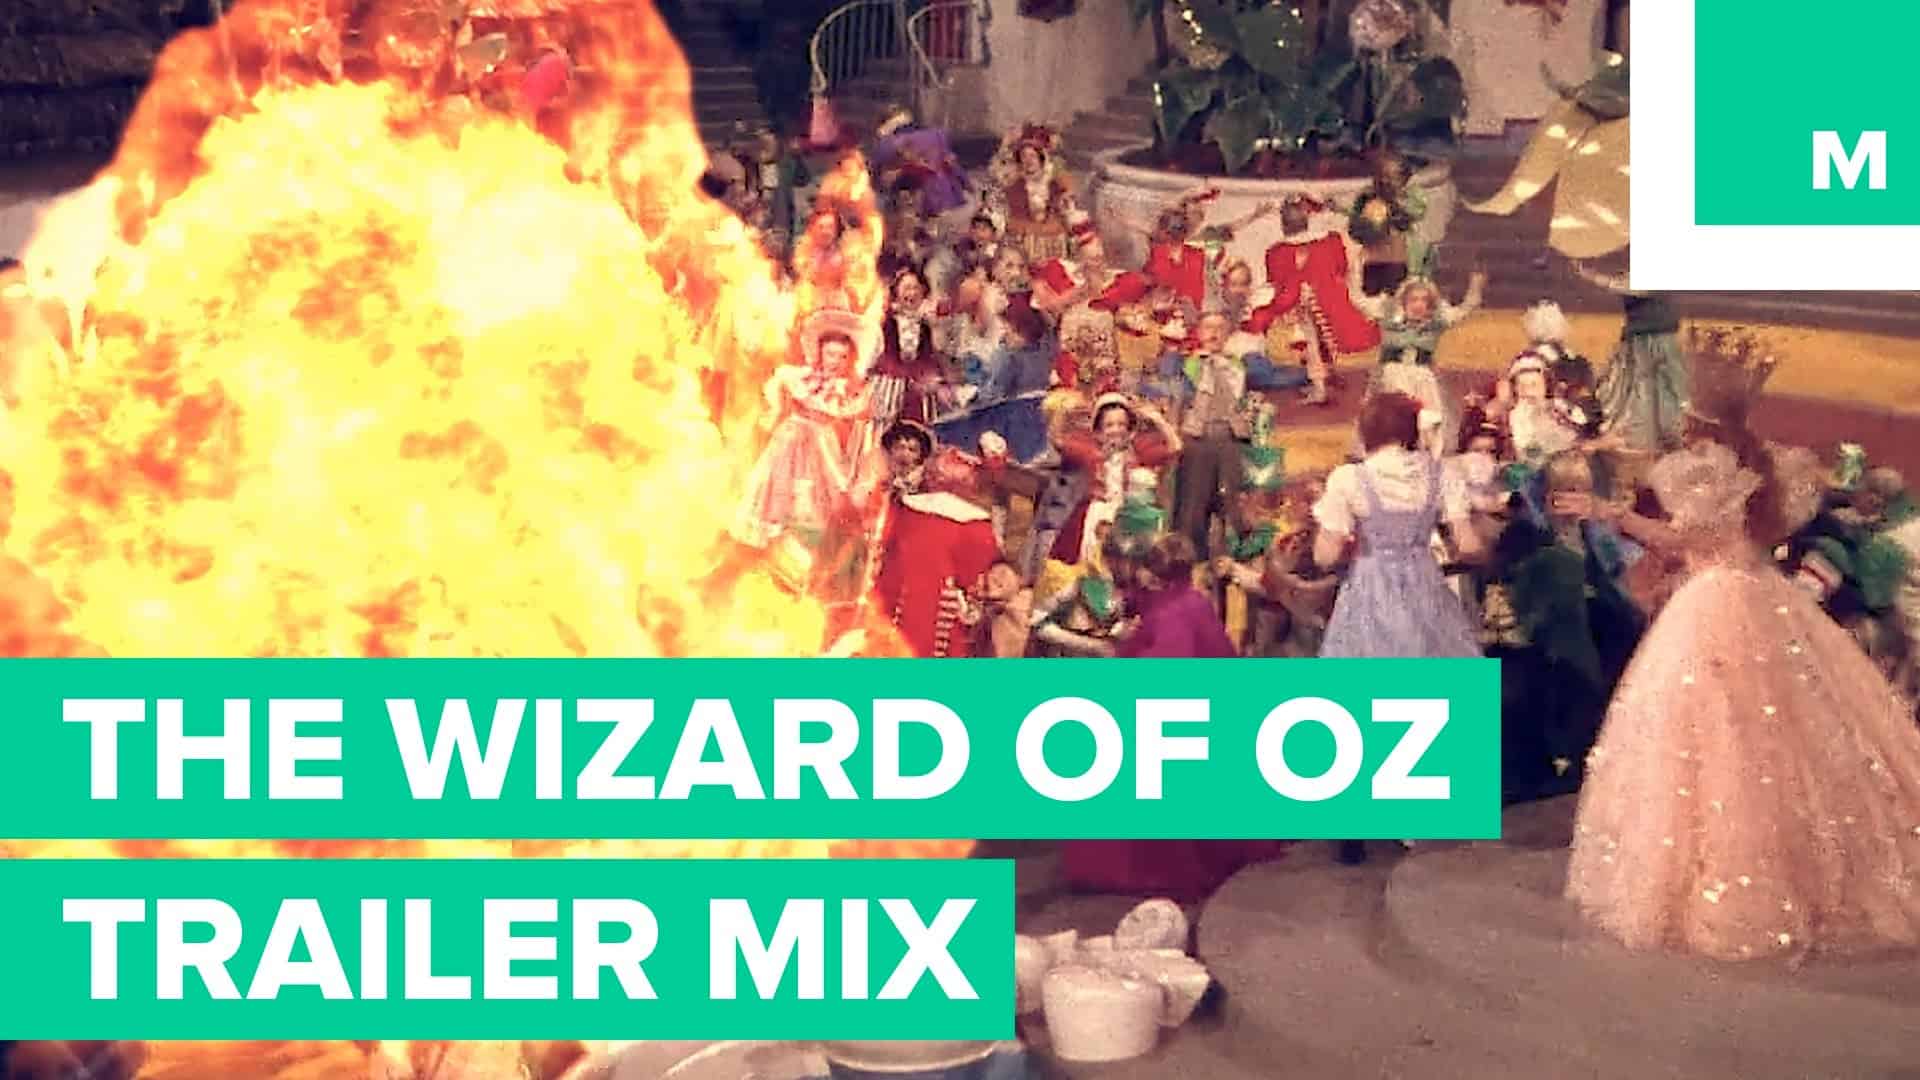 "The Wizard of Oz" as a Michael Bay Movie